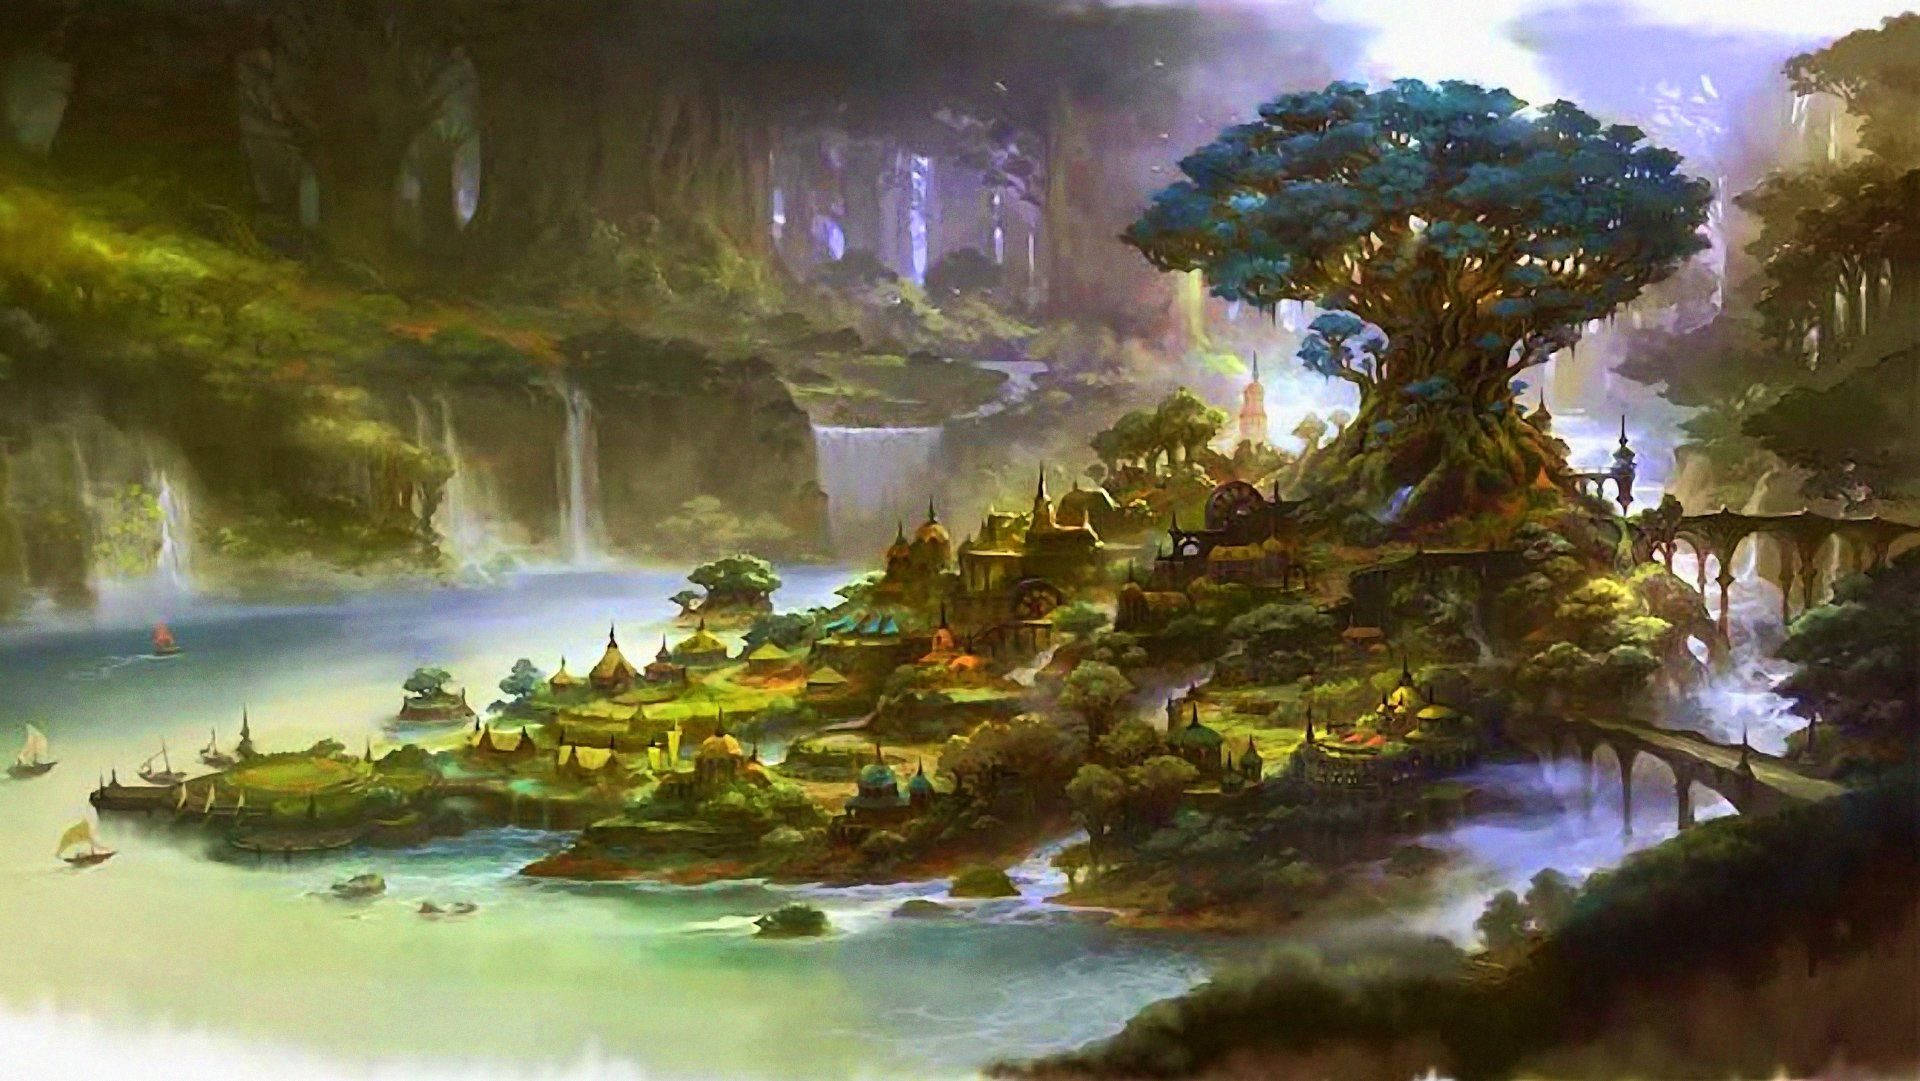 "Welcome to Gridania, the lush forest city in the world of Eorzea." Wallpaper